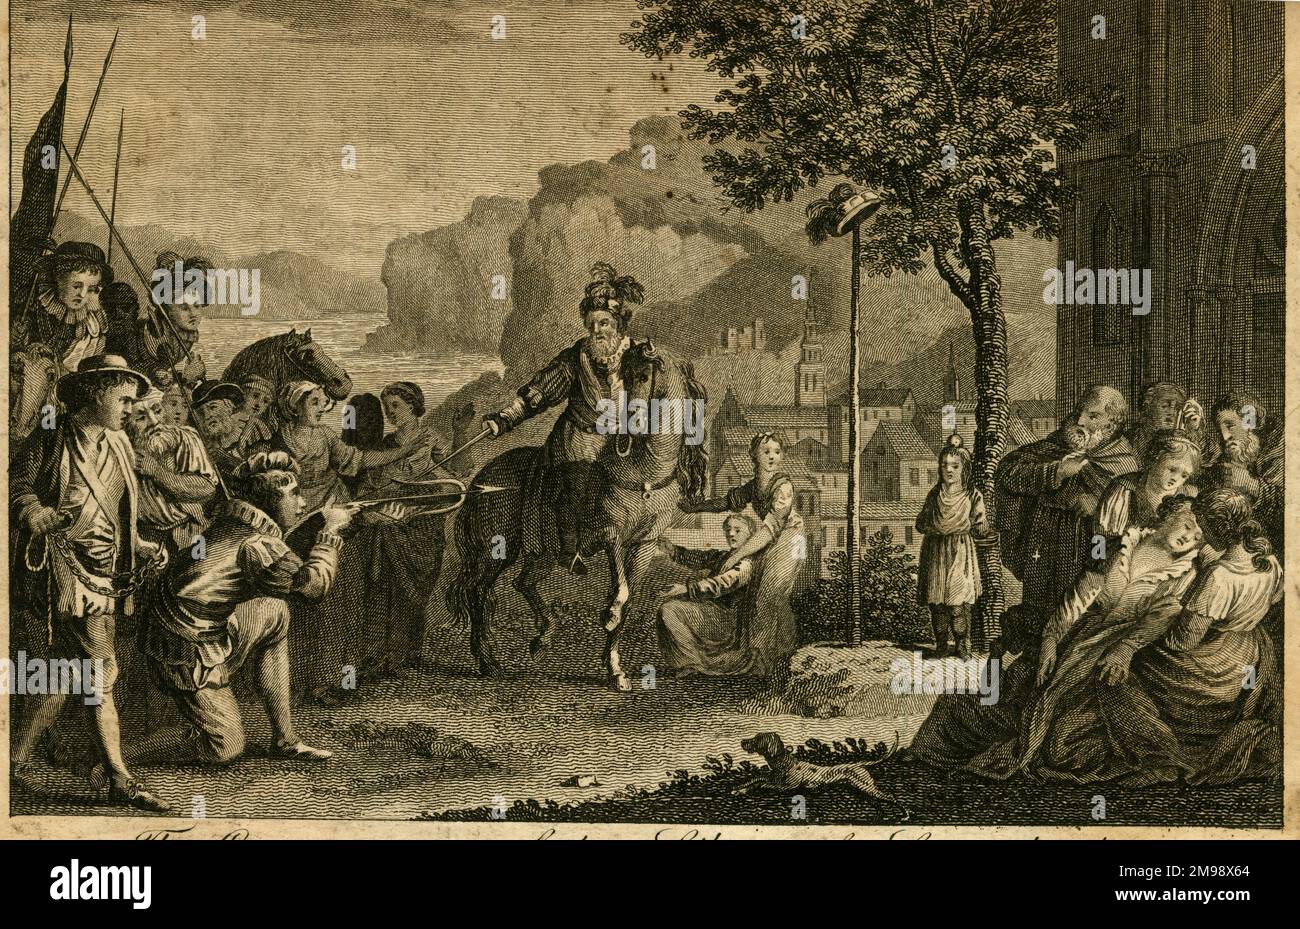 William Tell, Commencement of the Liberty of Switzerland -- the famous scene in which Tell shoots an apple on his son's head. Stock Photo